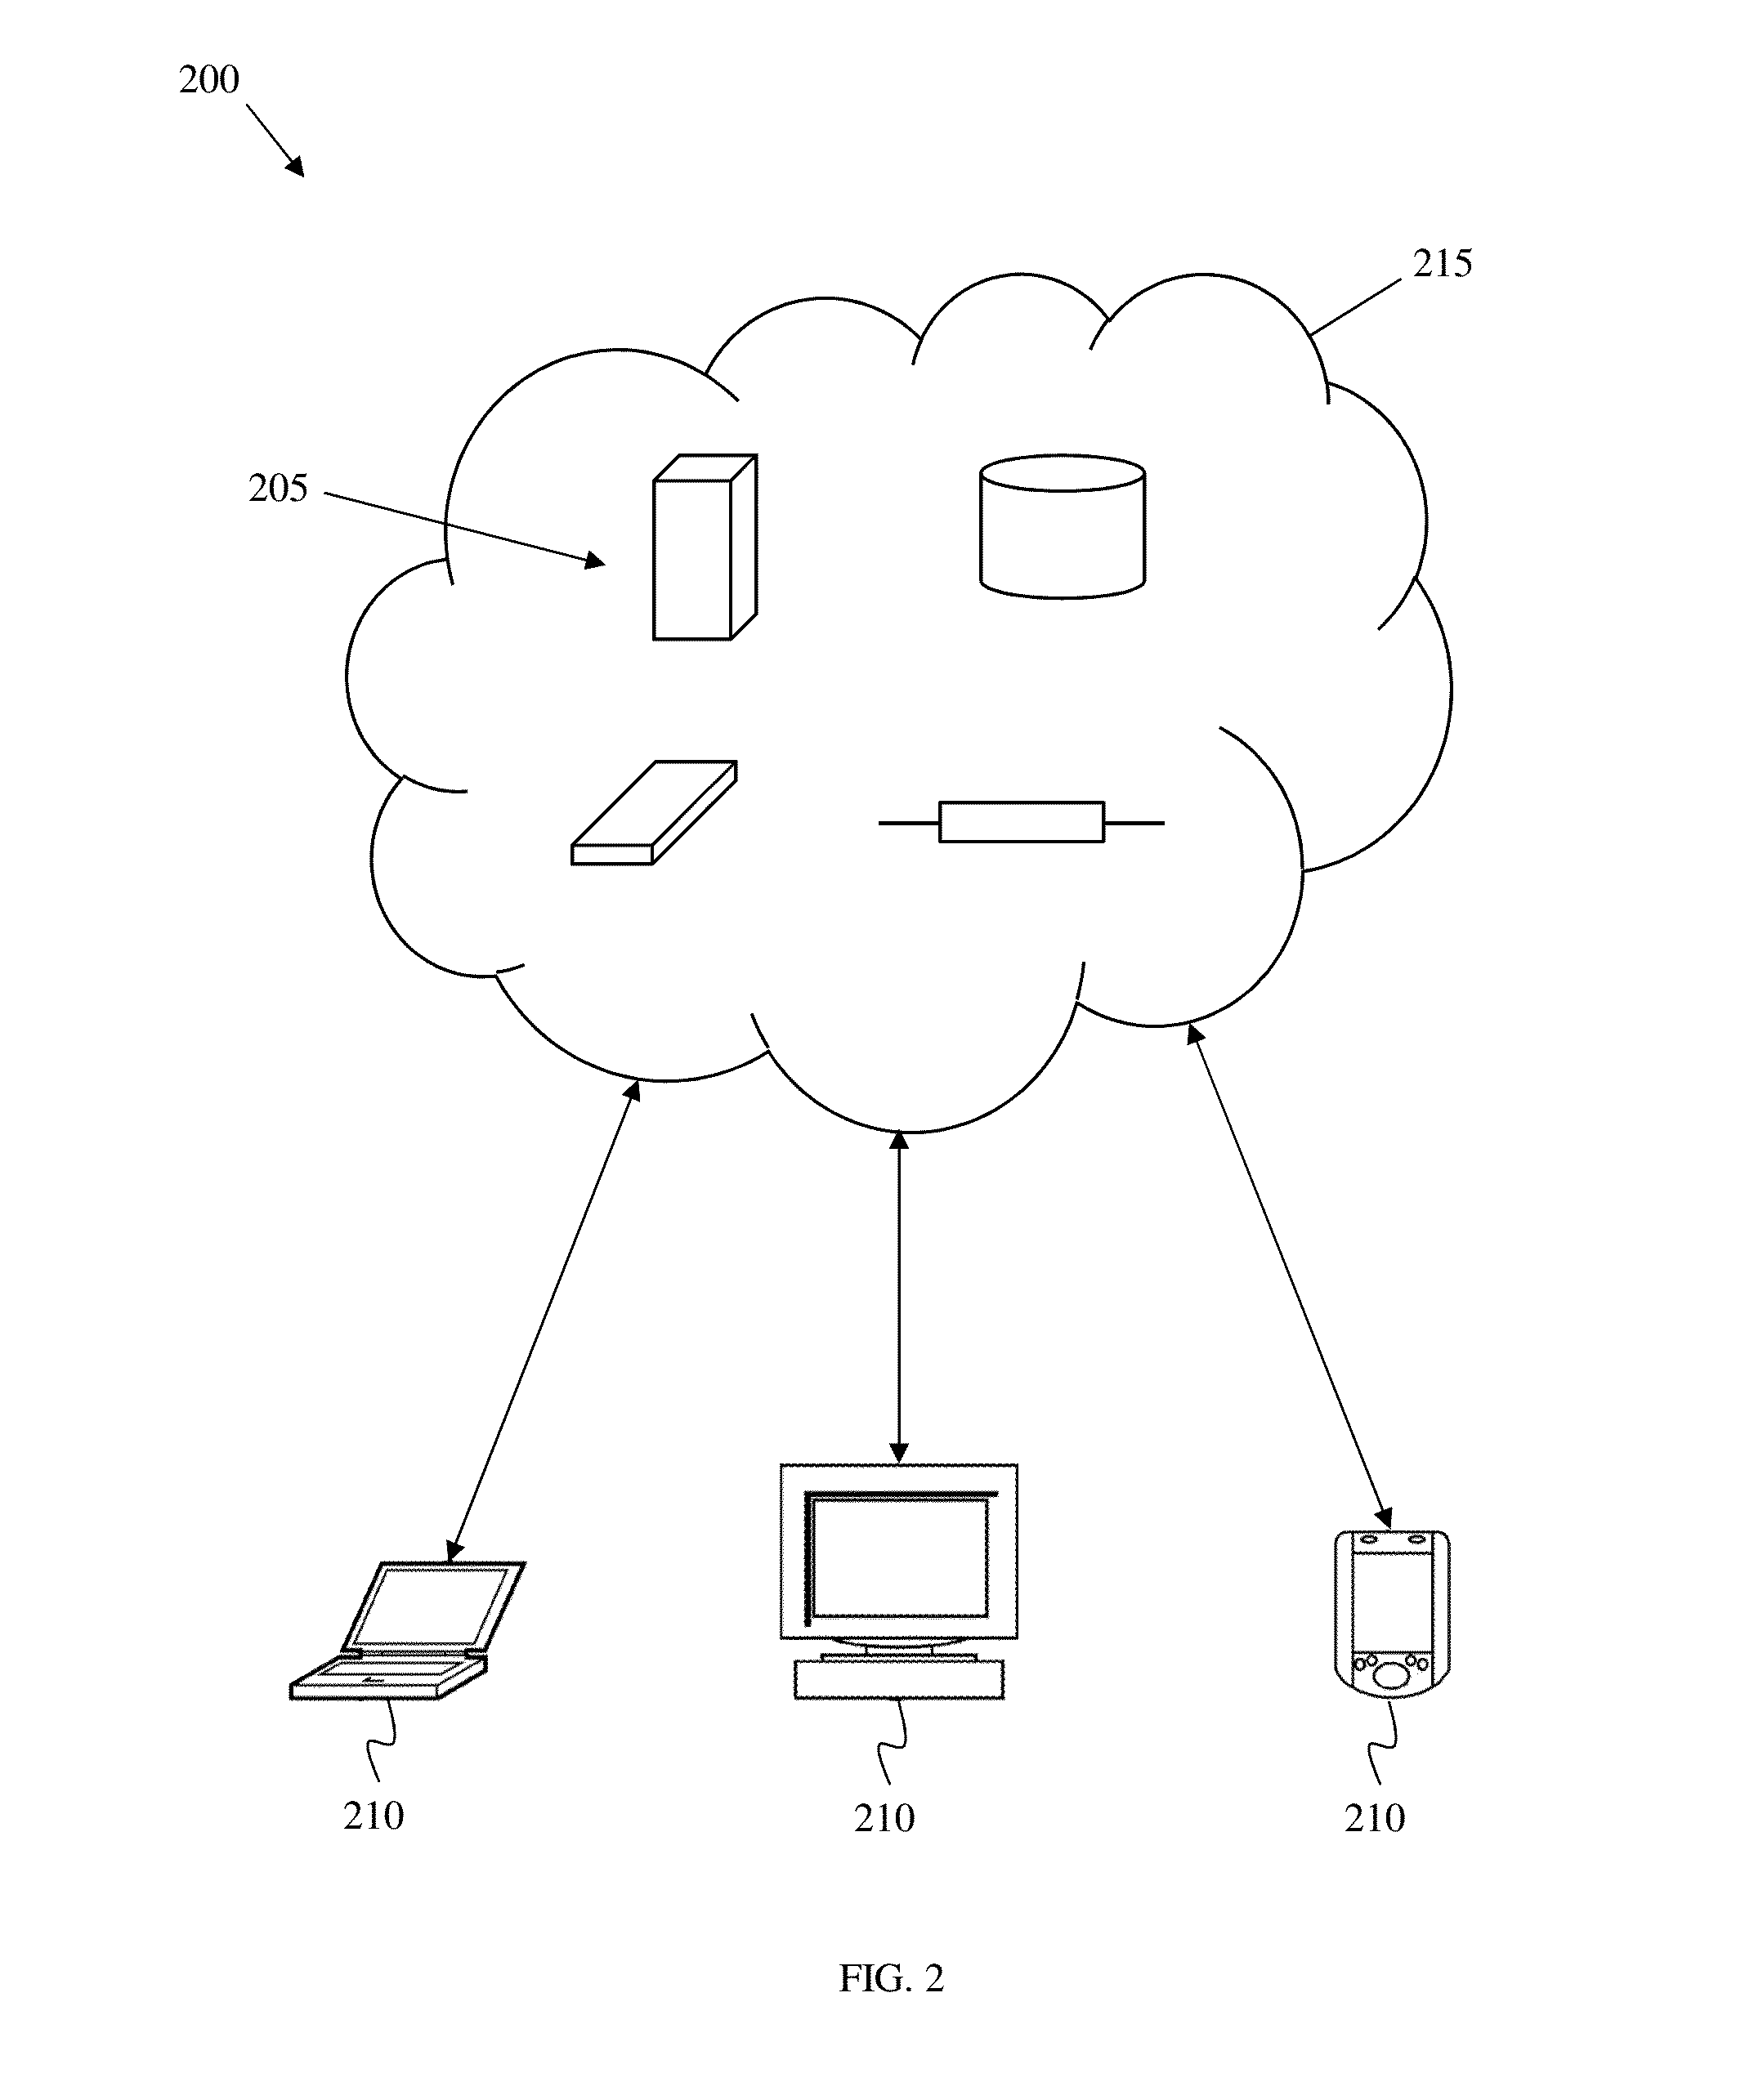 Application programming interface monitoring tool notification and escalation method and system